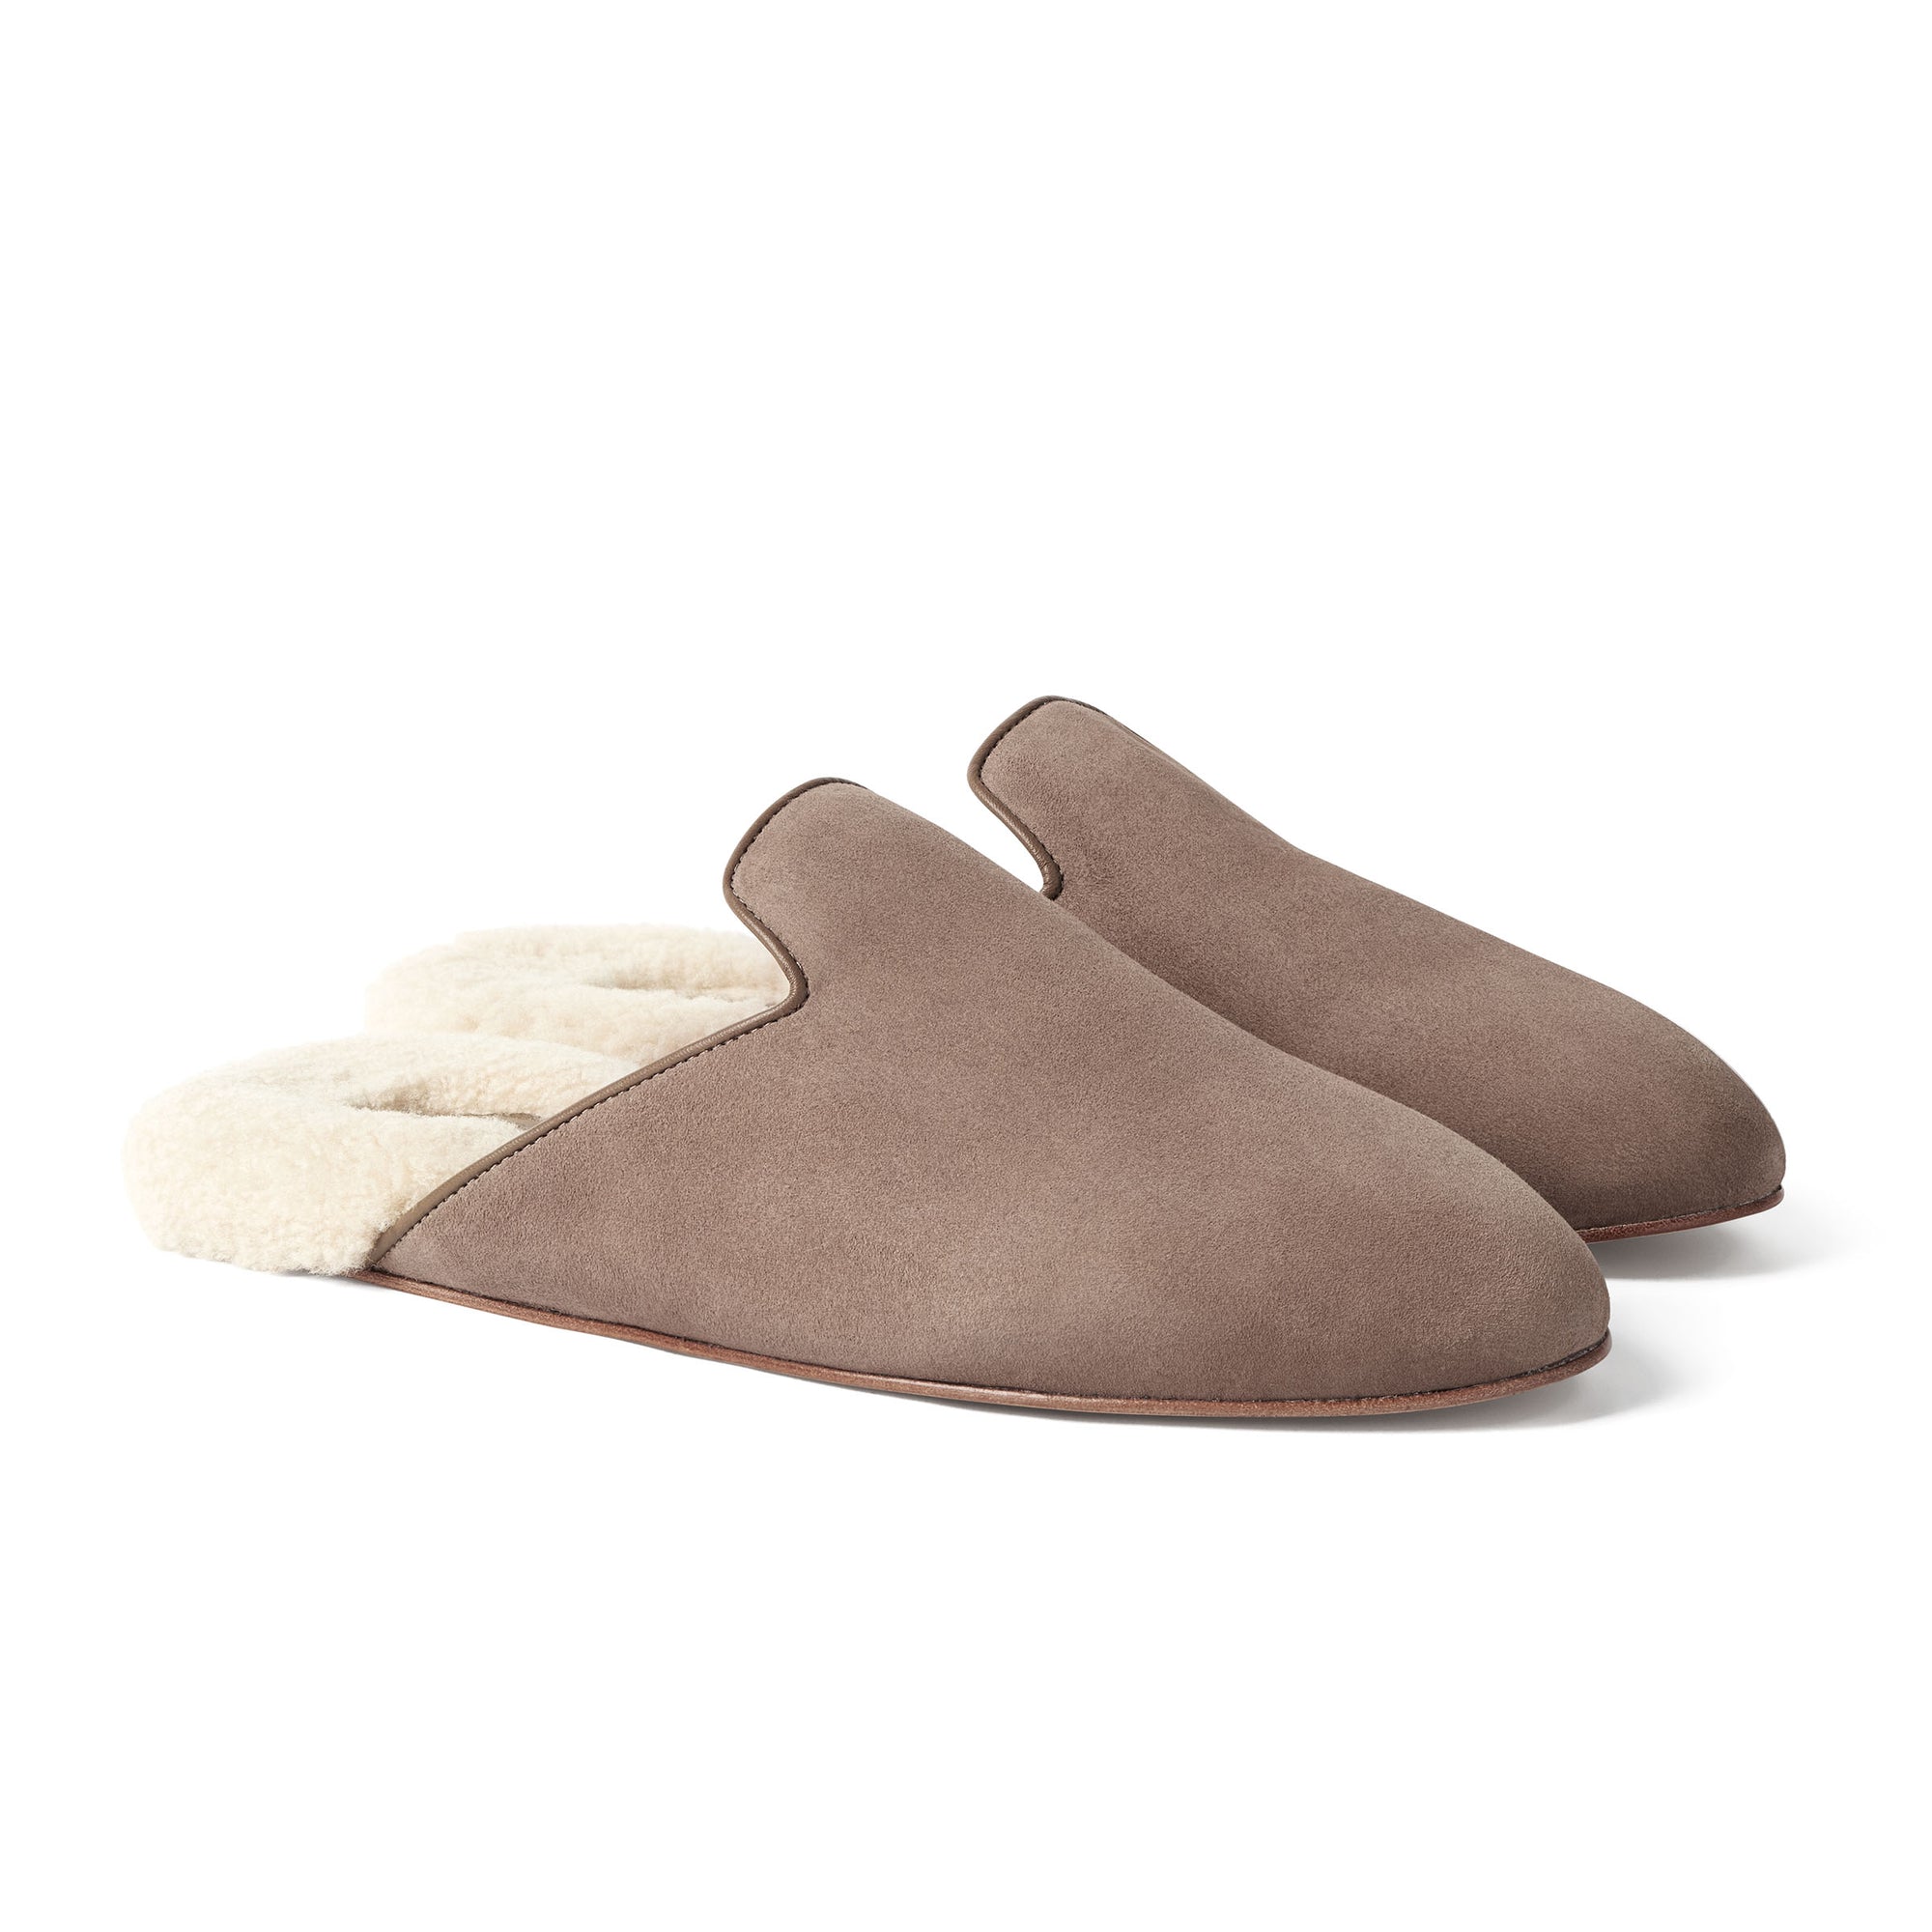 Inabo Fritz Slipper in taupe suede and white shearling